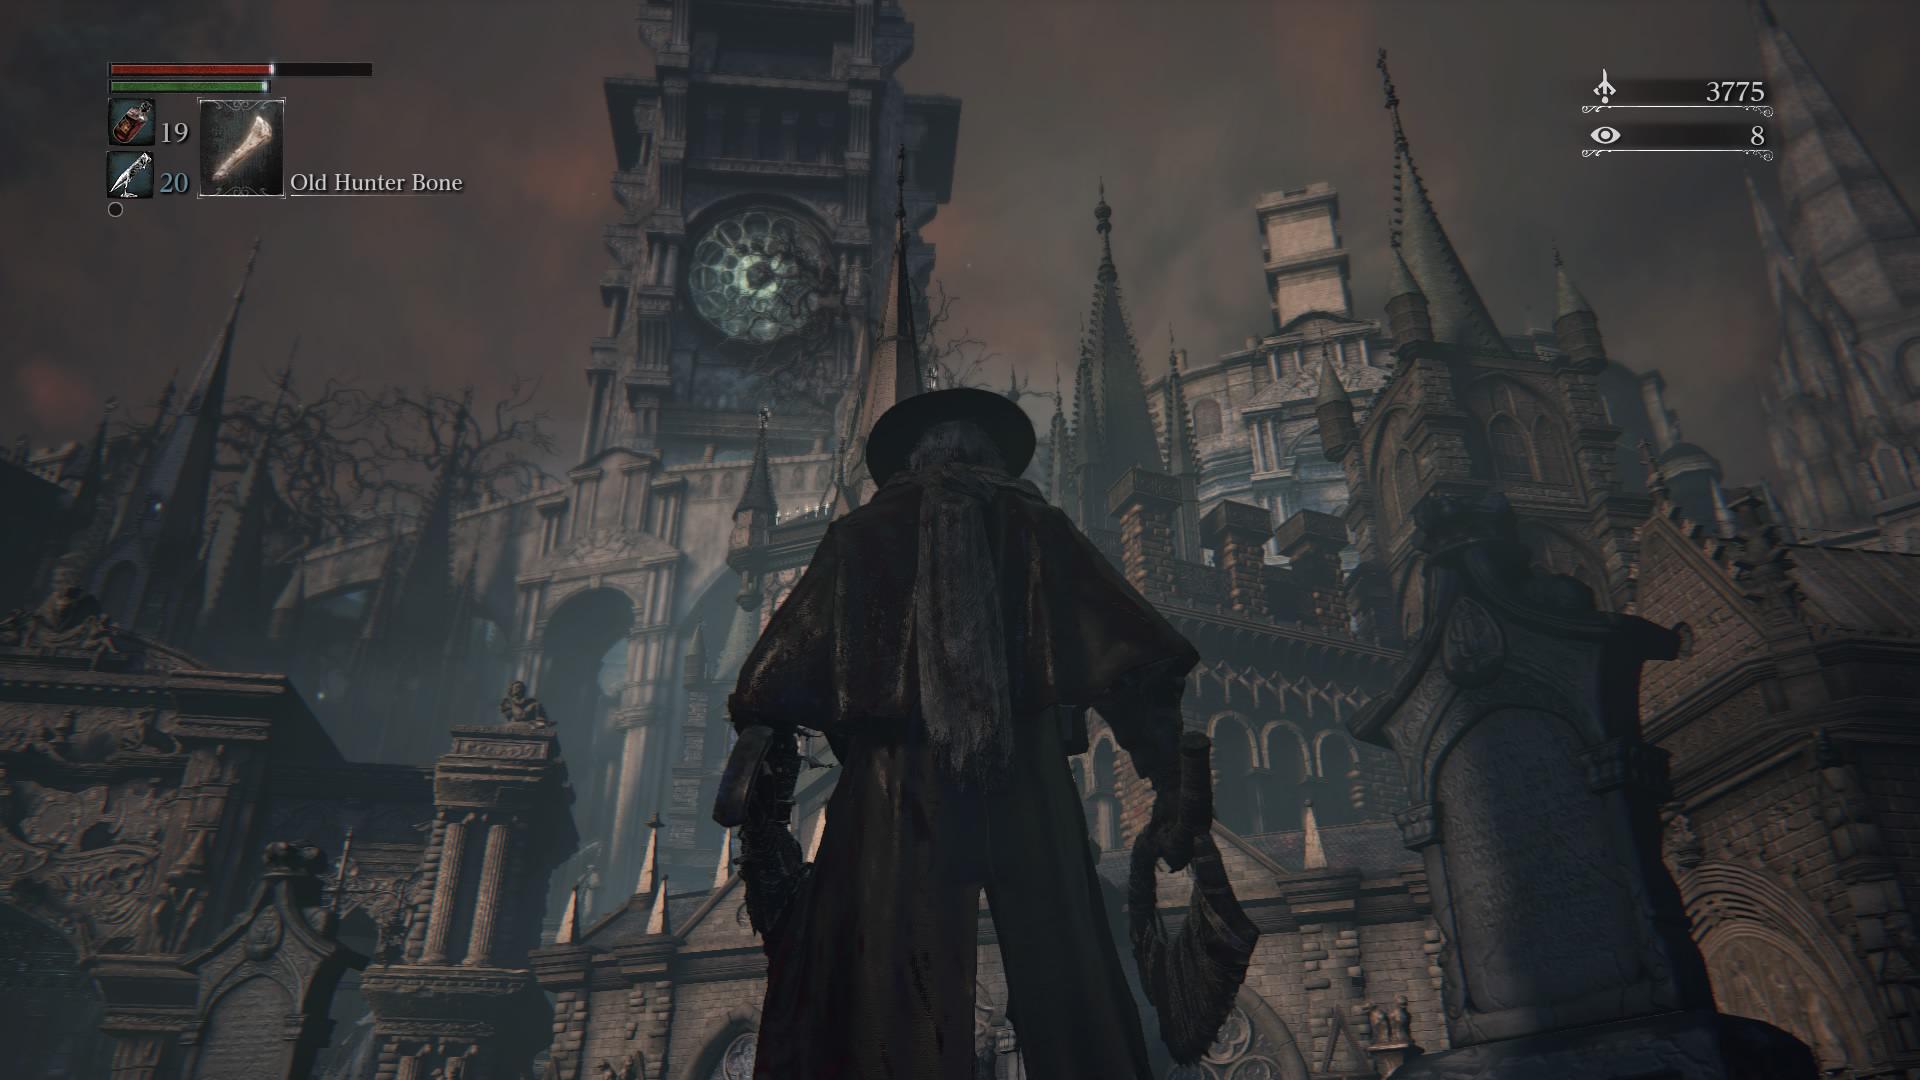 Bloodborne is Souls-Like at its fullest, mixed with eldrich horror and broken spirits alike.